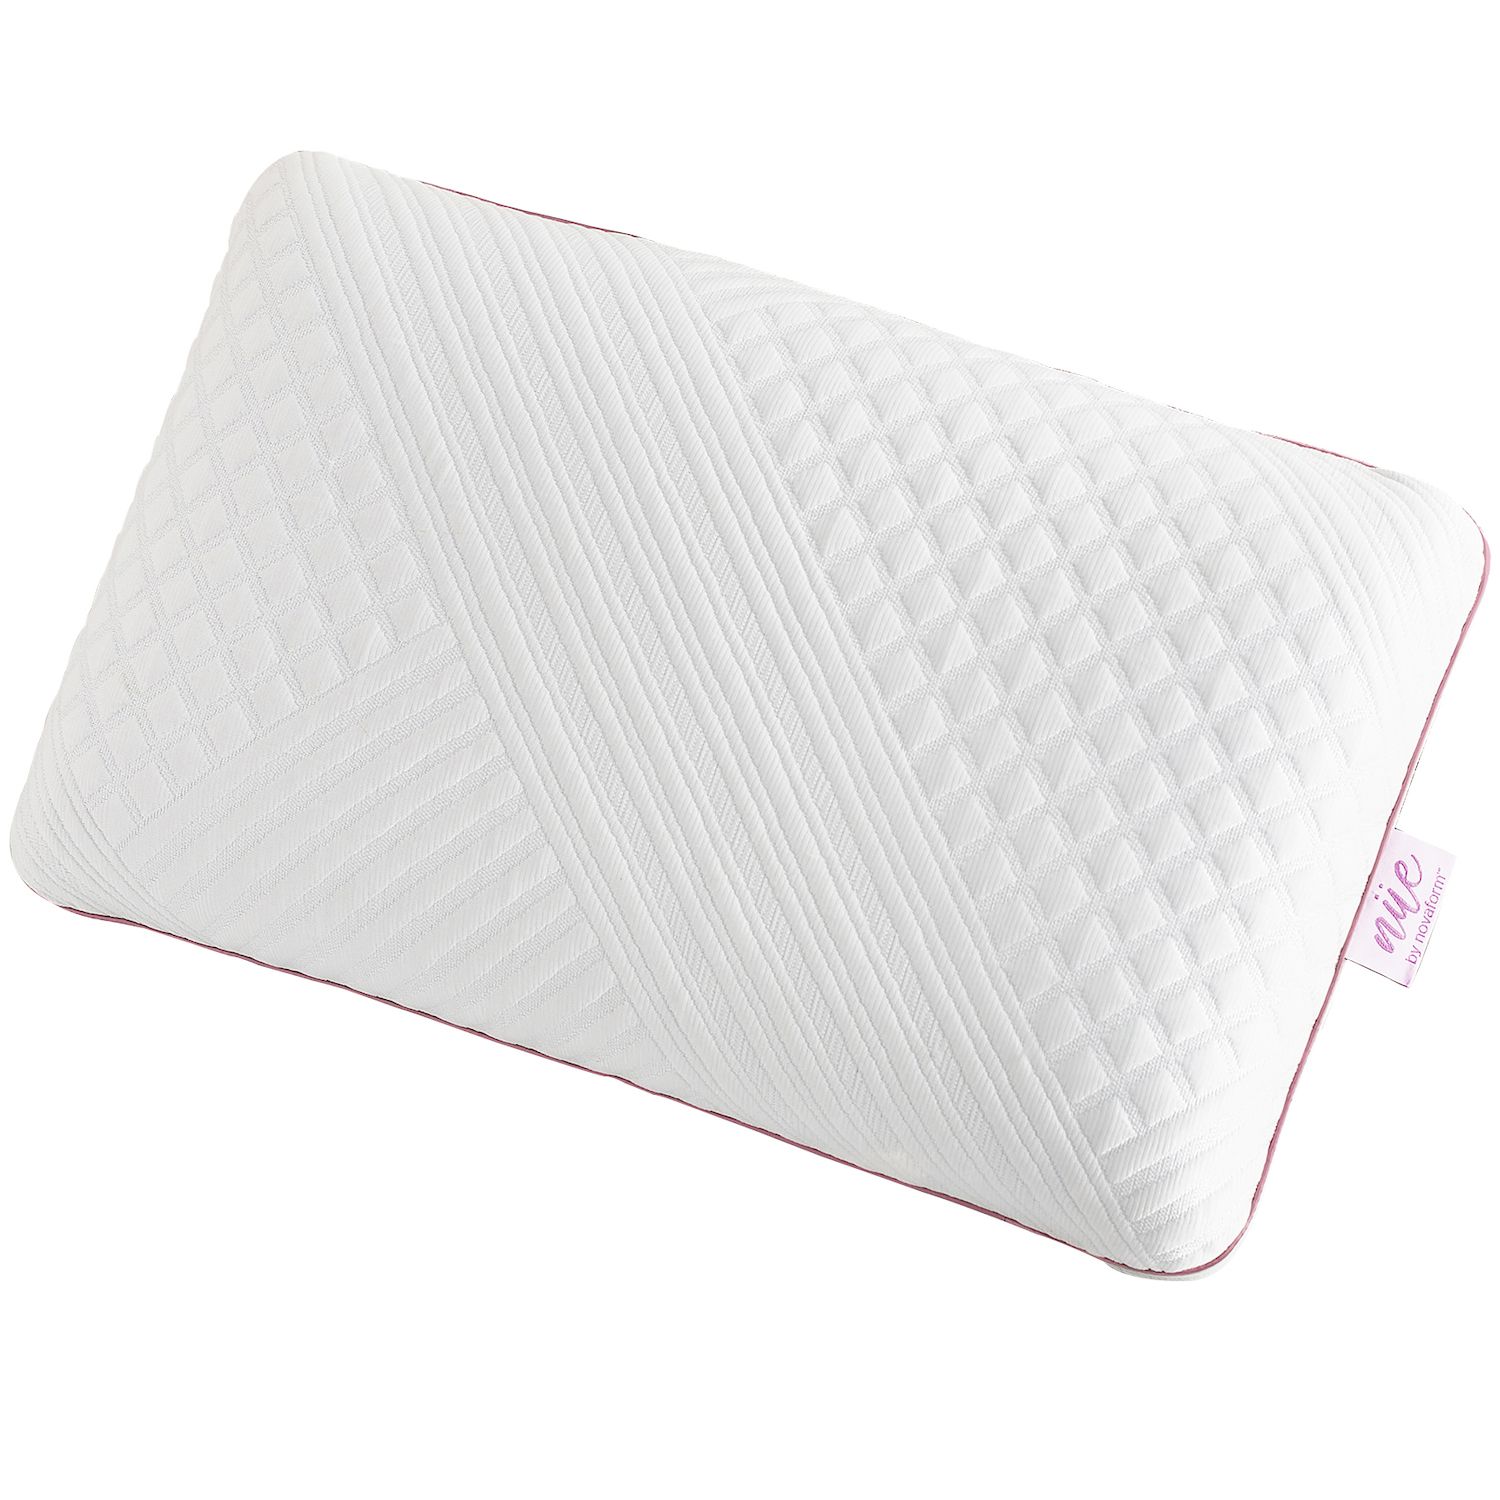 Nue by Novaform C-Shape Pregnancy Pillow with Antimicrobial Cool Cover